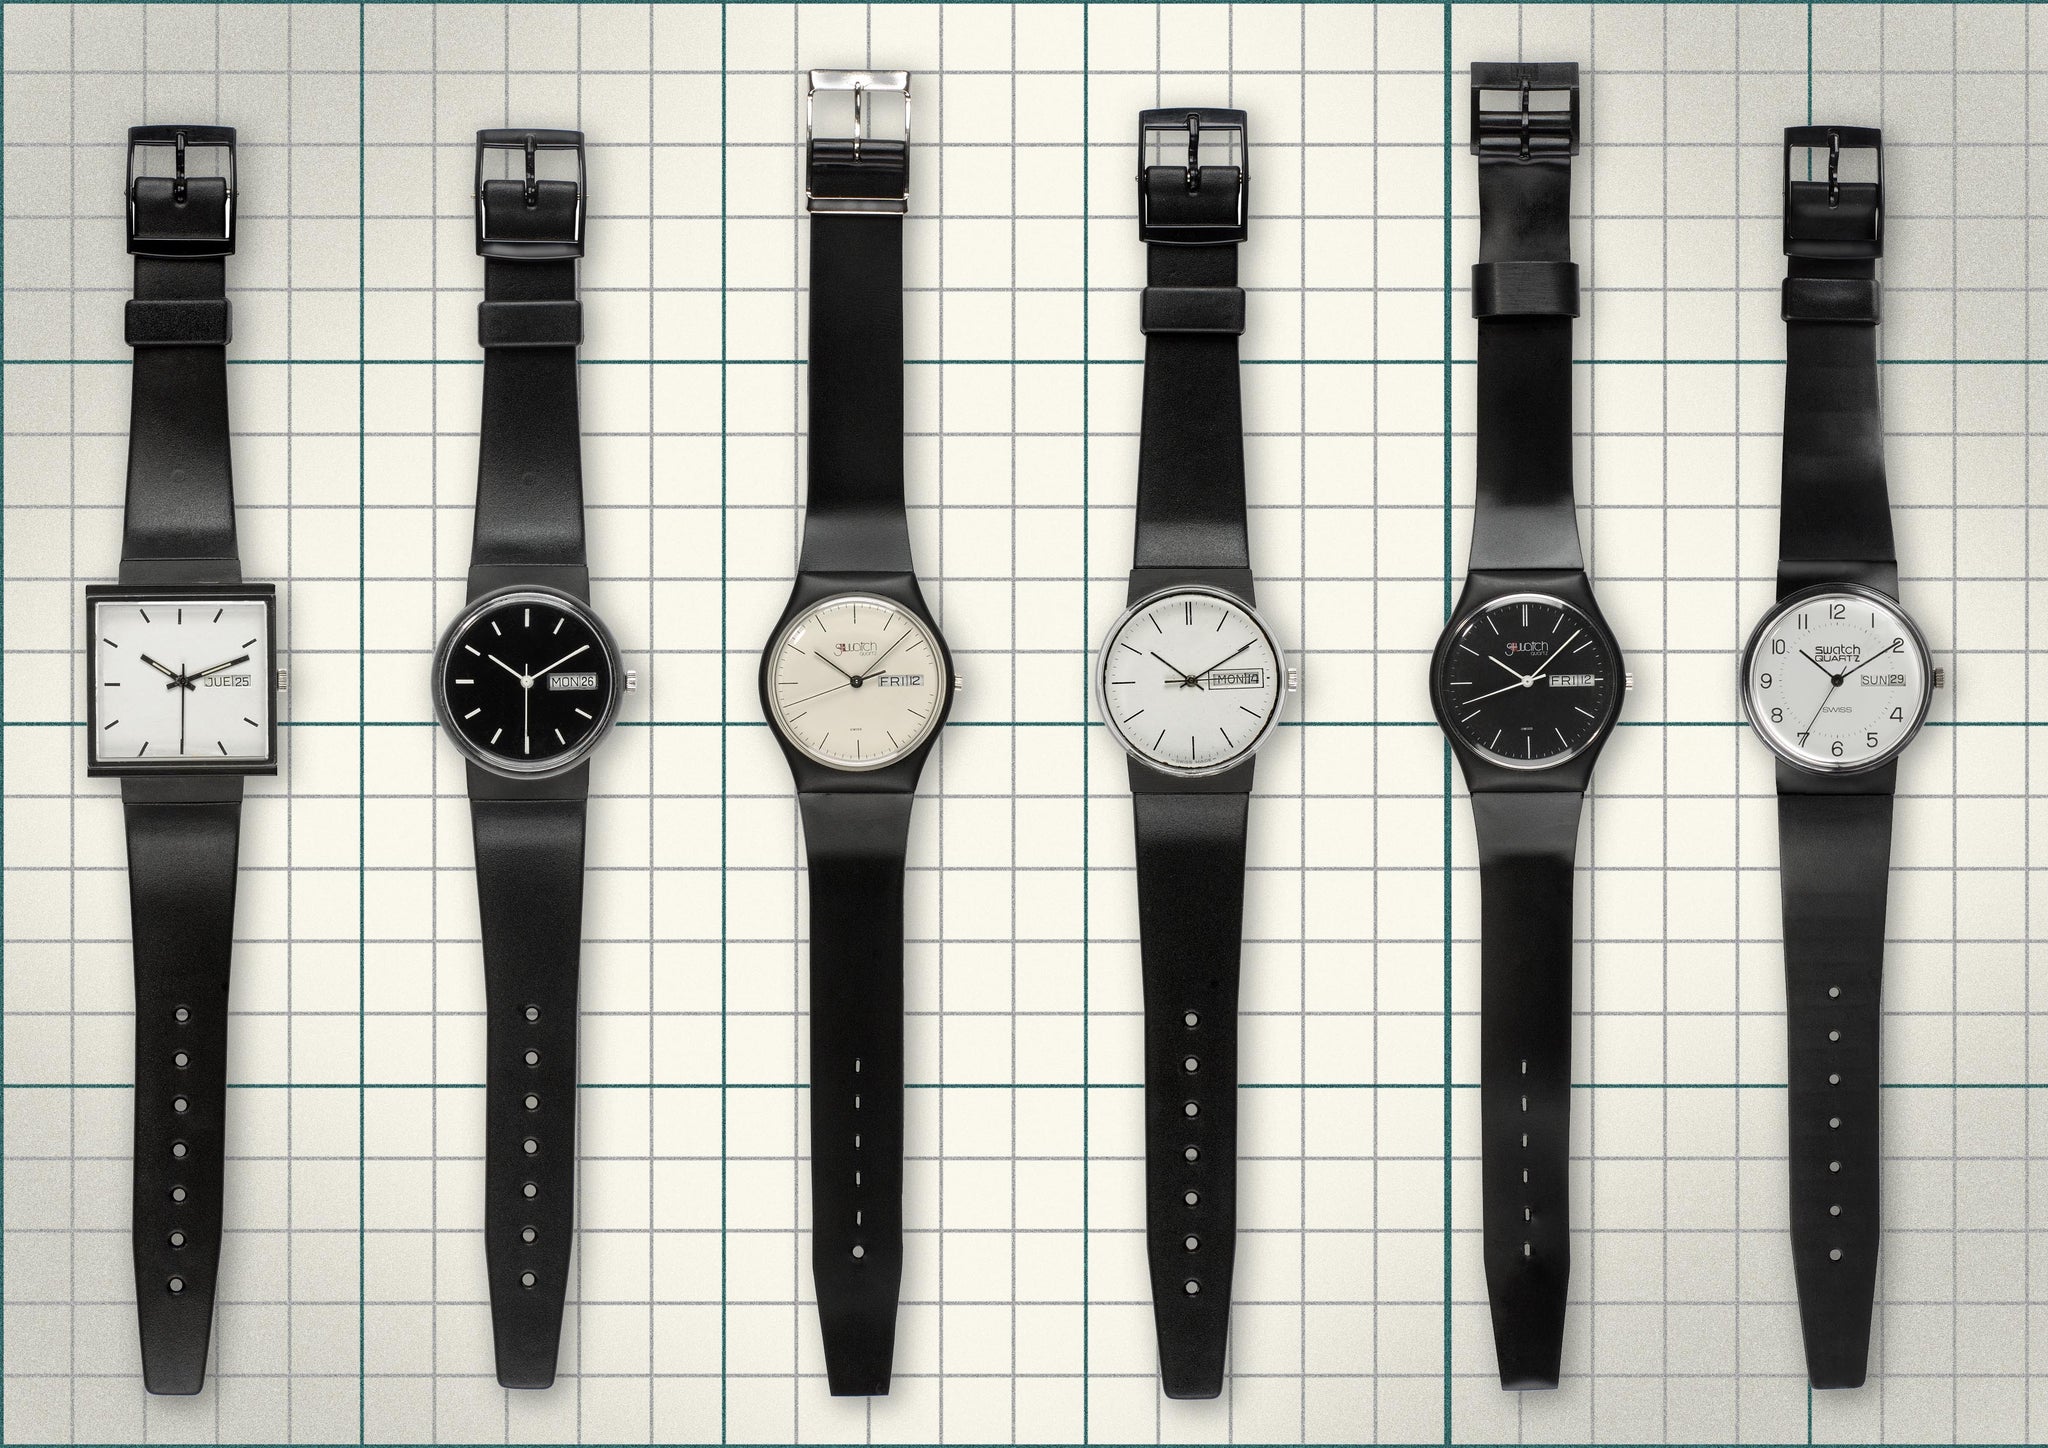 Six early Swatch prototypes with white and black dials